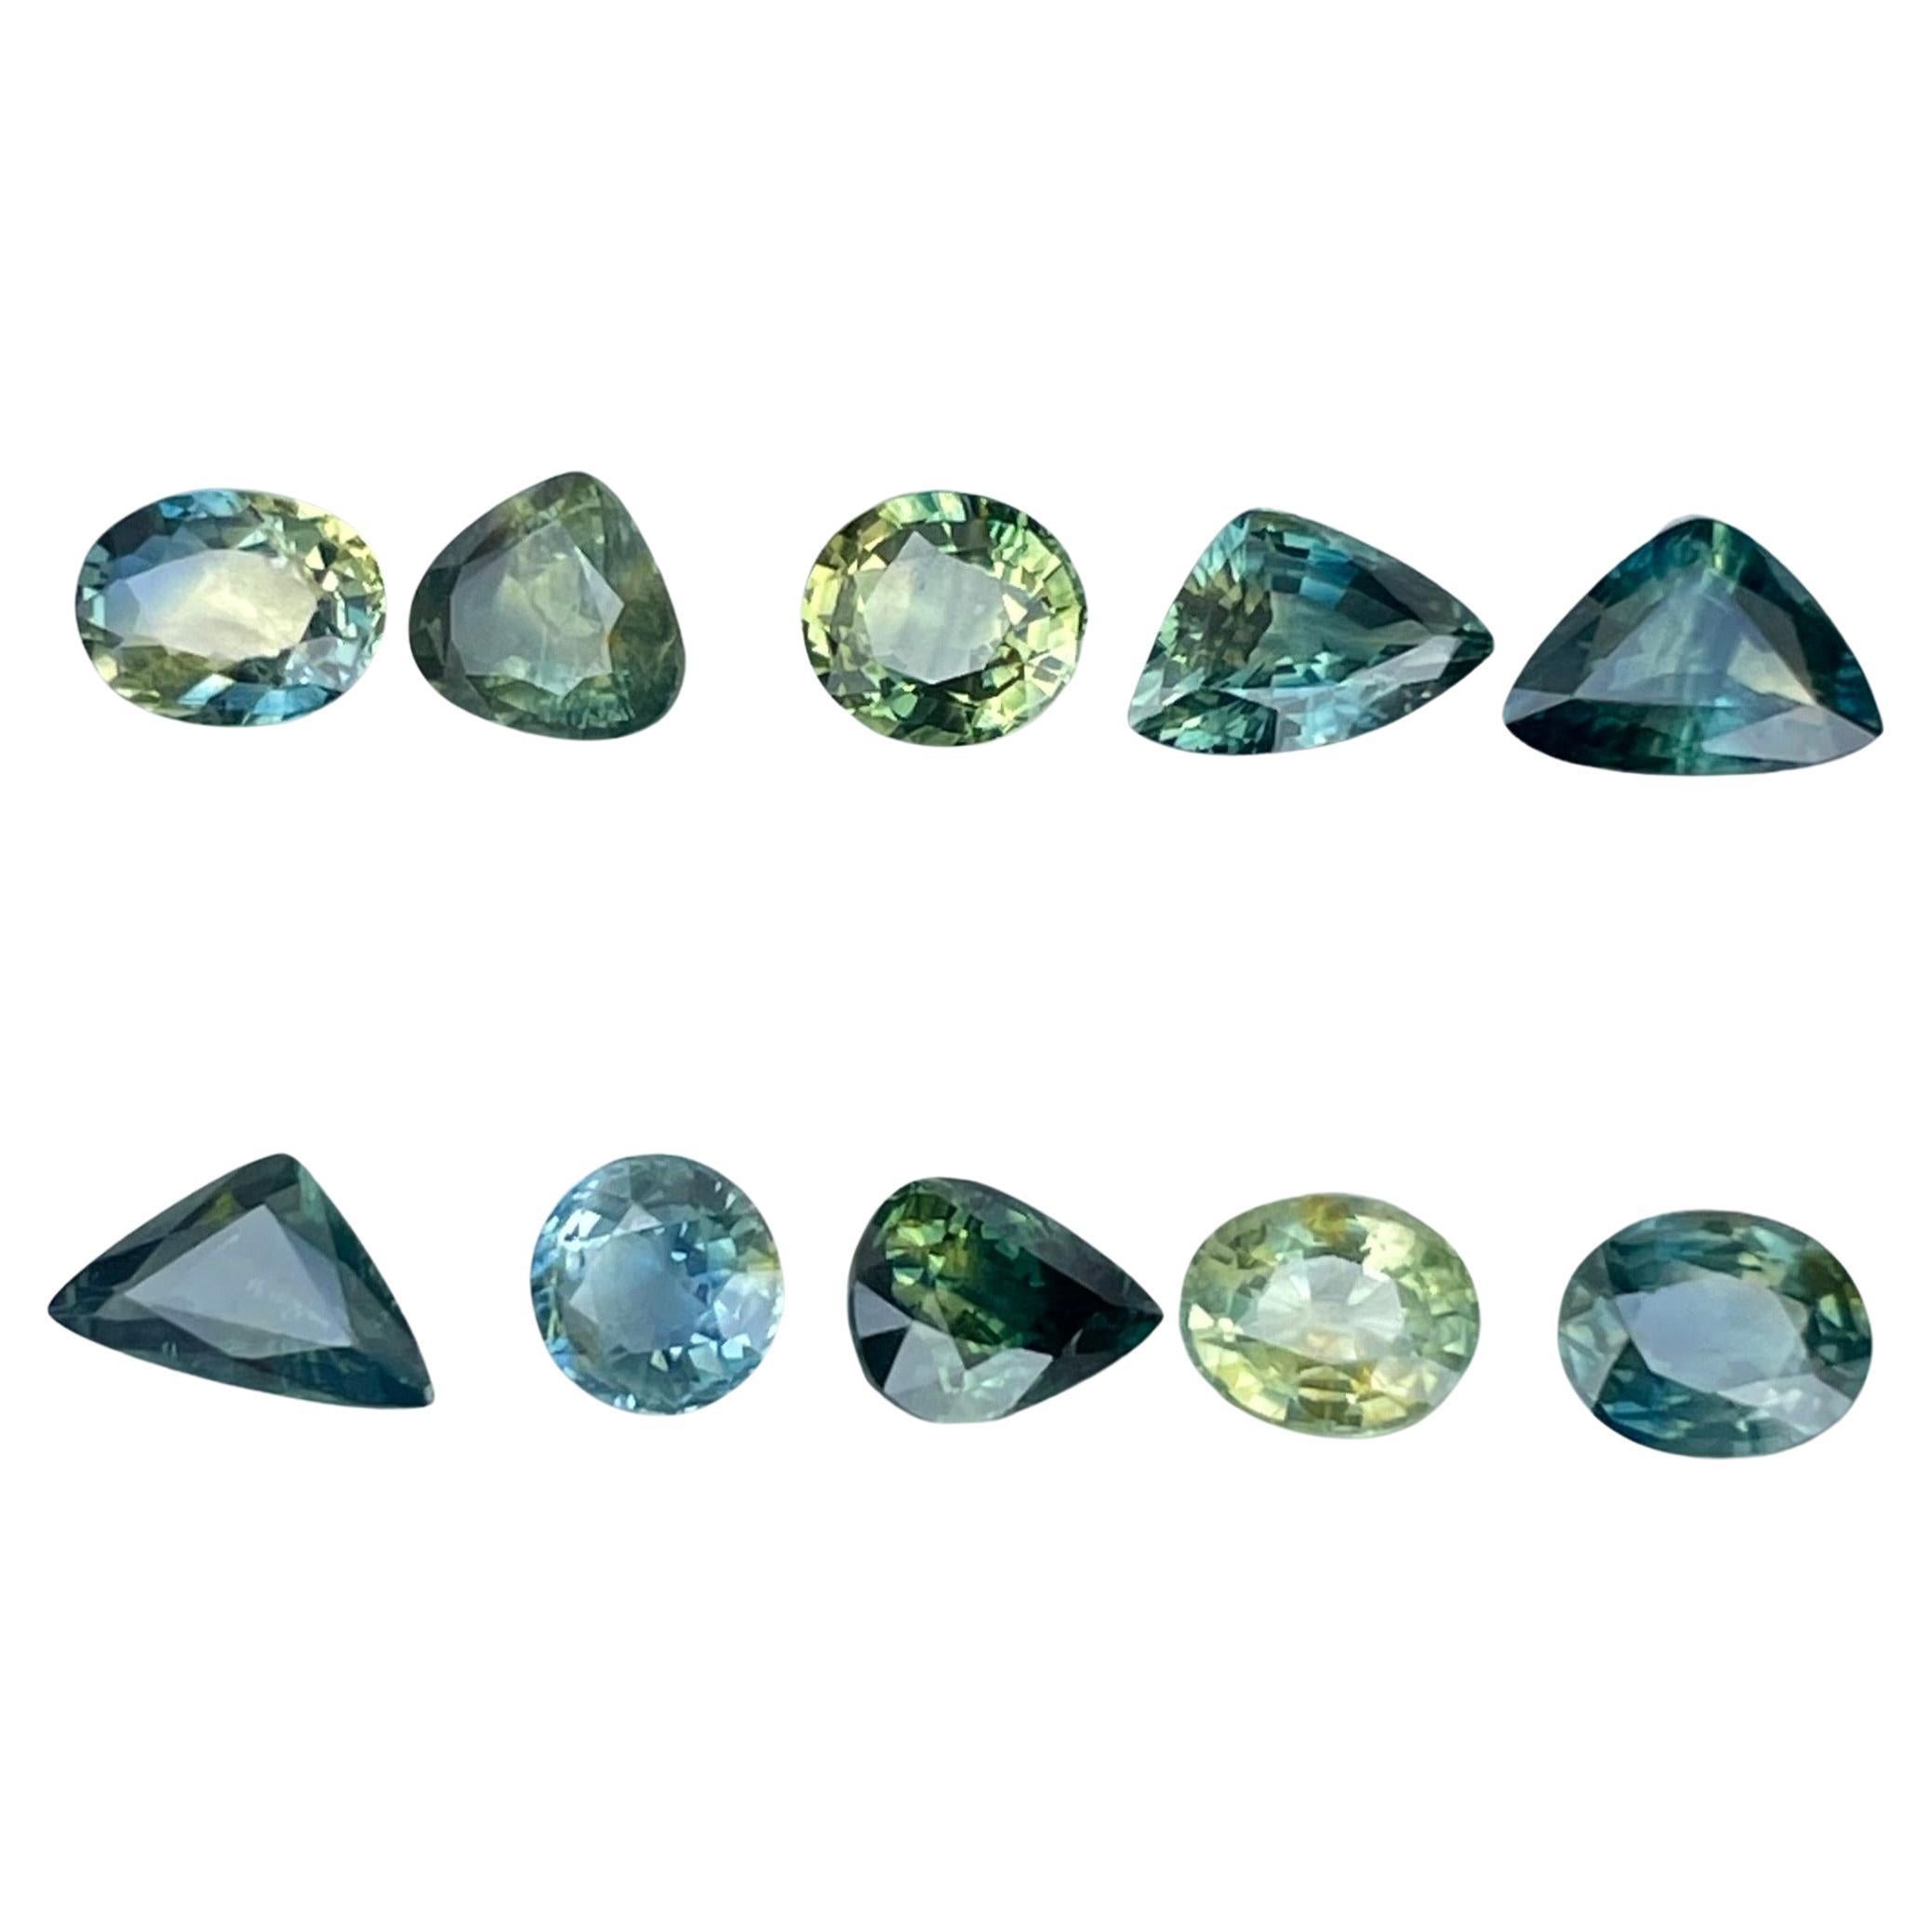 Natural Parti Sapphire 6.90 carats 10 Pieces Gemstones Lot from Madagascar